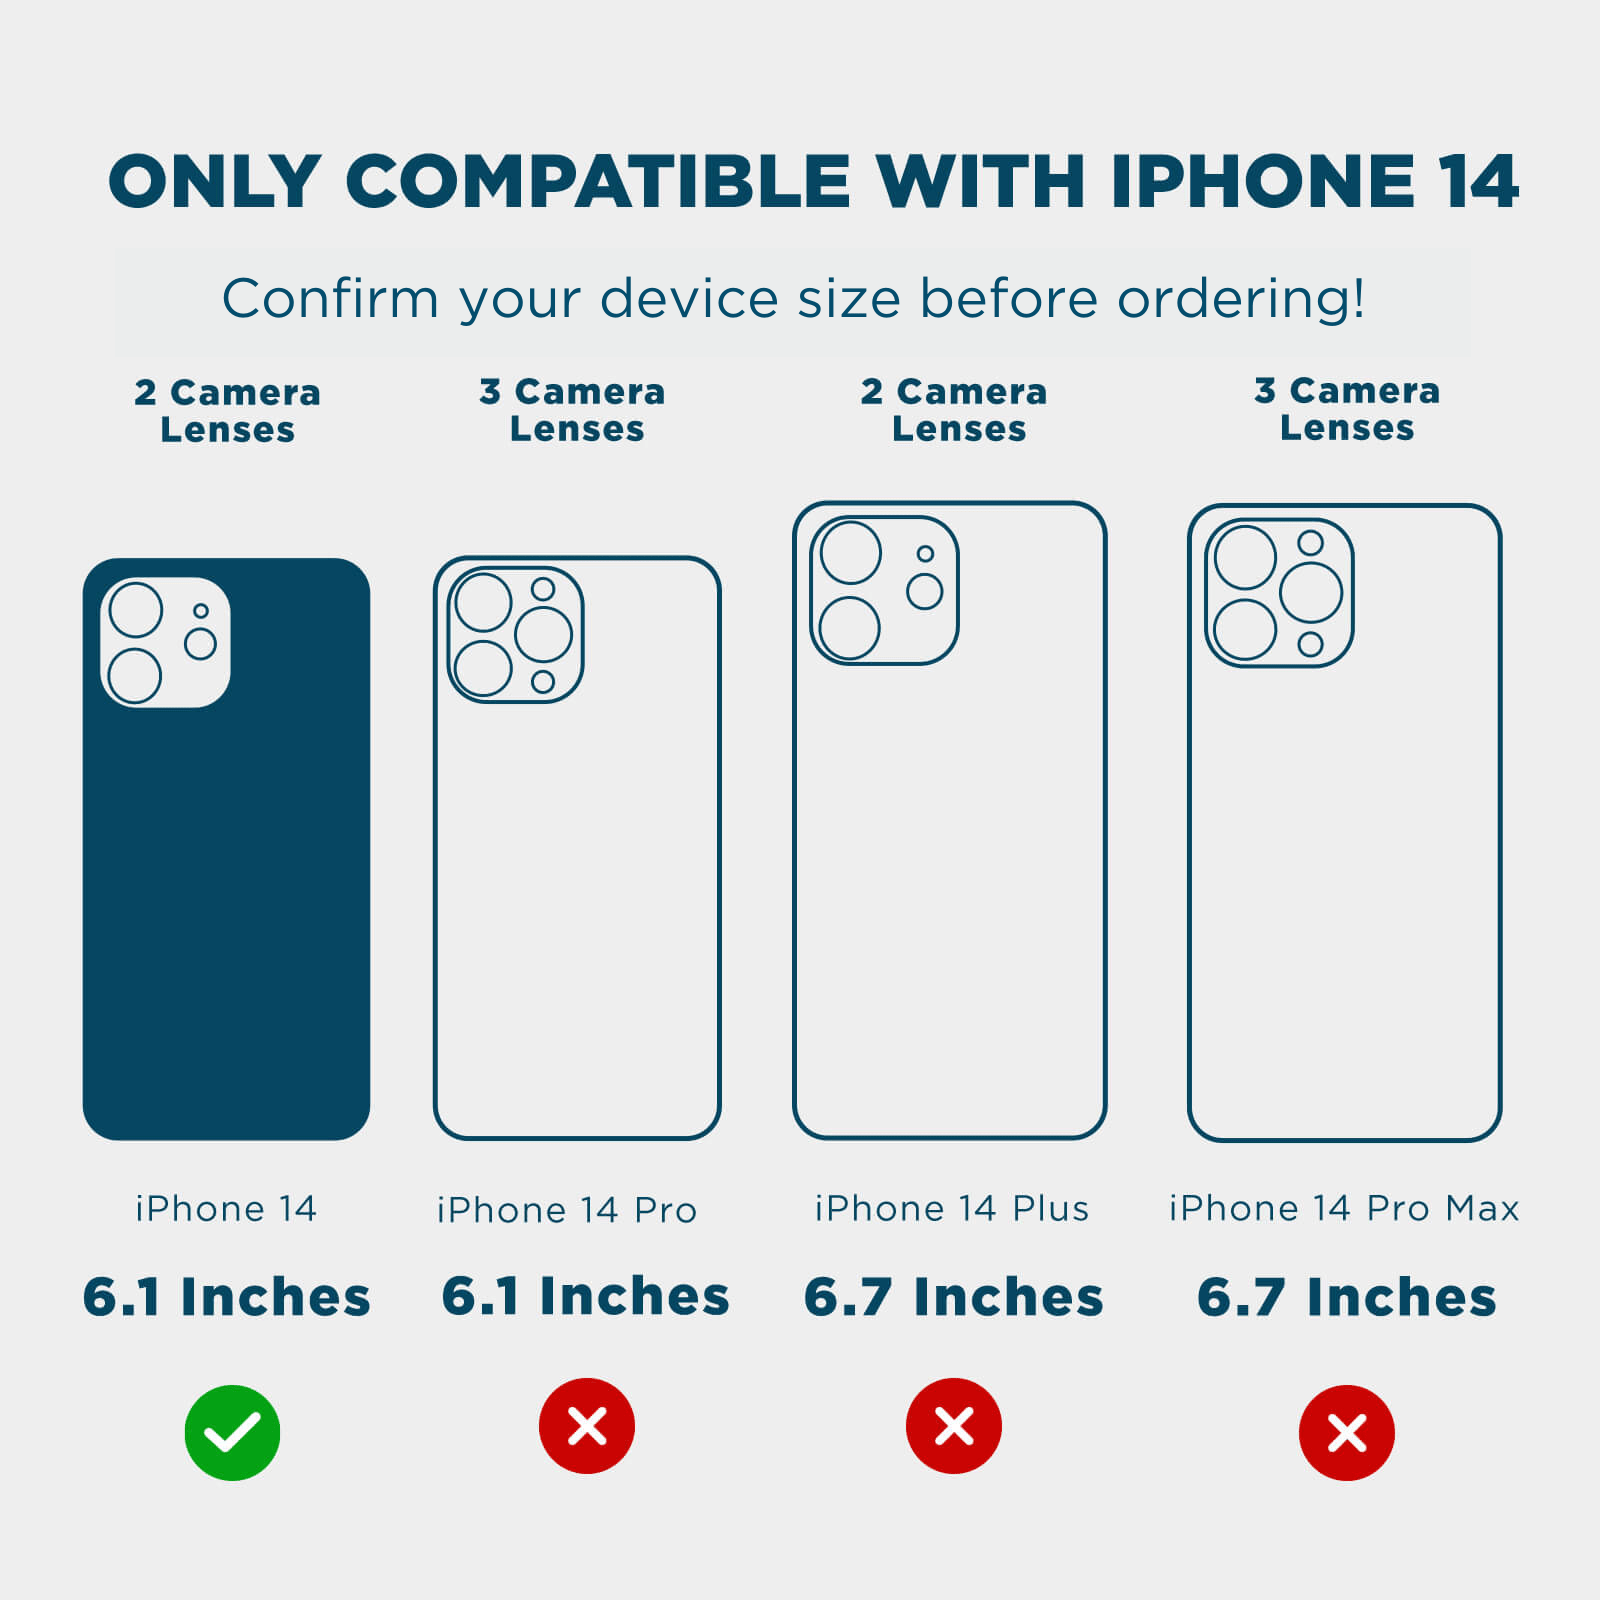 ONLY COMPATIBLE WITH IPHONE 14 CONFIRM YOUR DEVICE SIZE BEFORE ORDERING! 2 CAMERA LENSES, 3 CAMERA LENSES, 2 CAMERA LENSES, 3 CAMERA LENSES. IPHONE 14 6.1" IPHONE 14 PRO 6.1" IPHONE 14 PLUS 6.7" IPHONE 14 PRO MAX 6.7". COLOR::BLACK